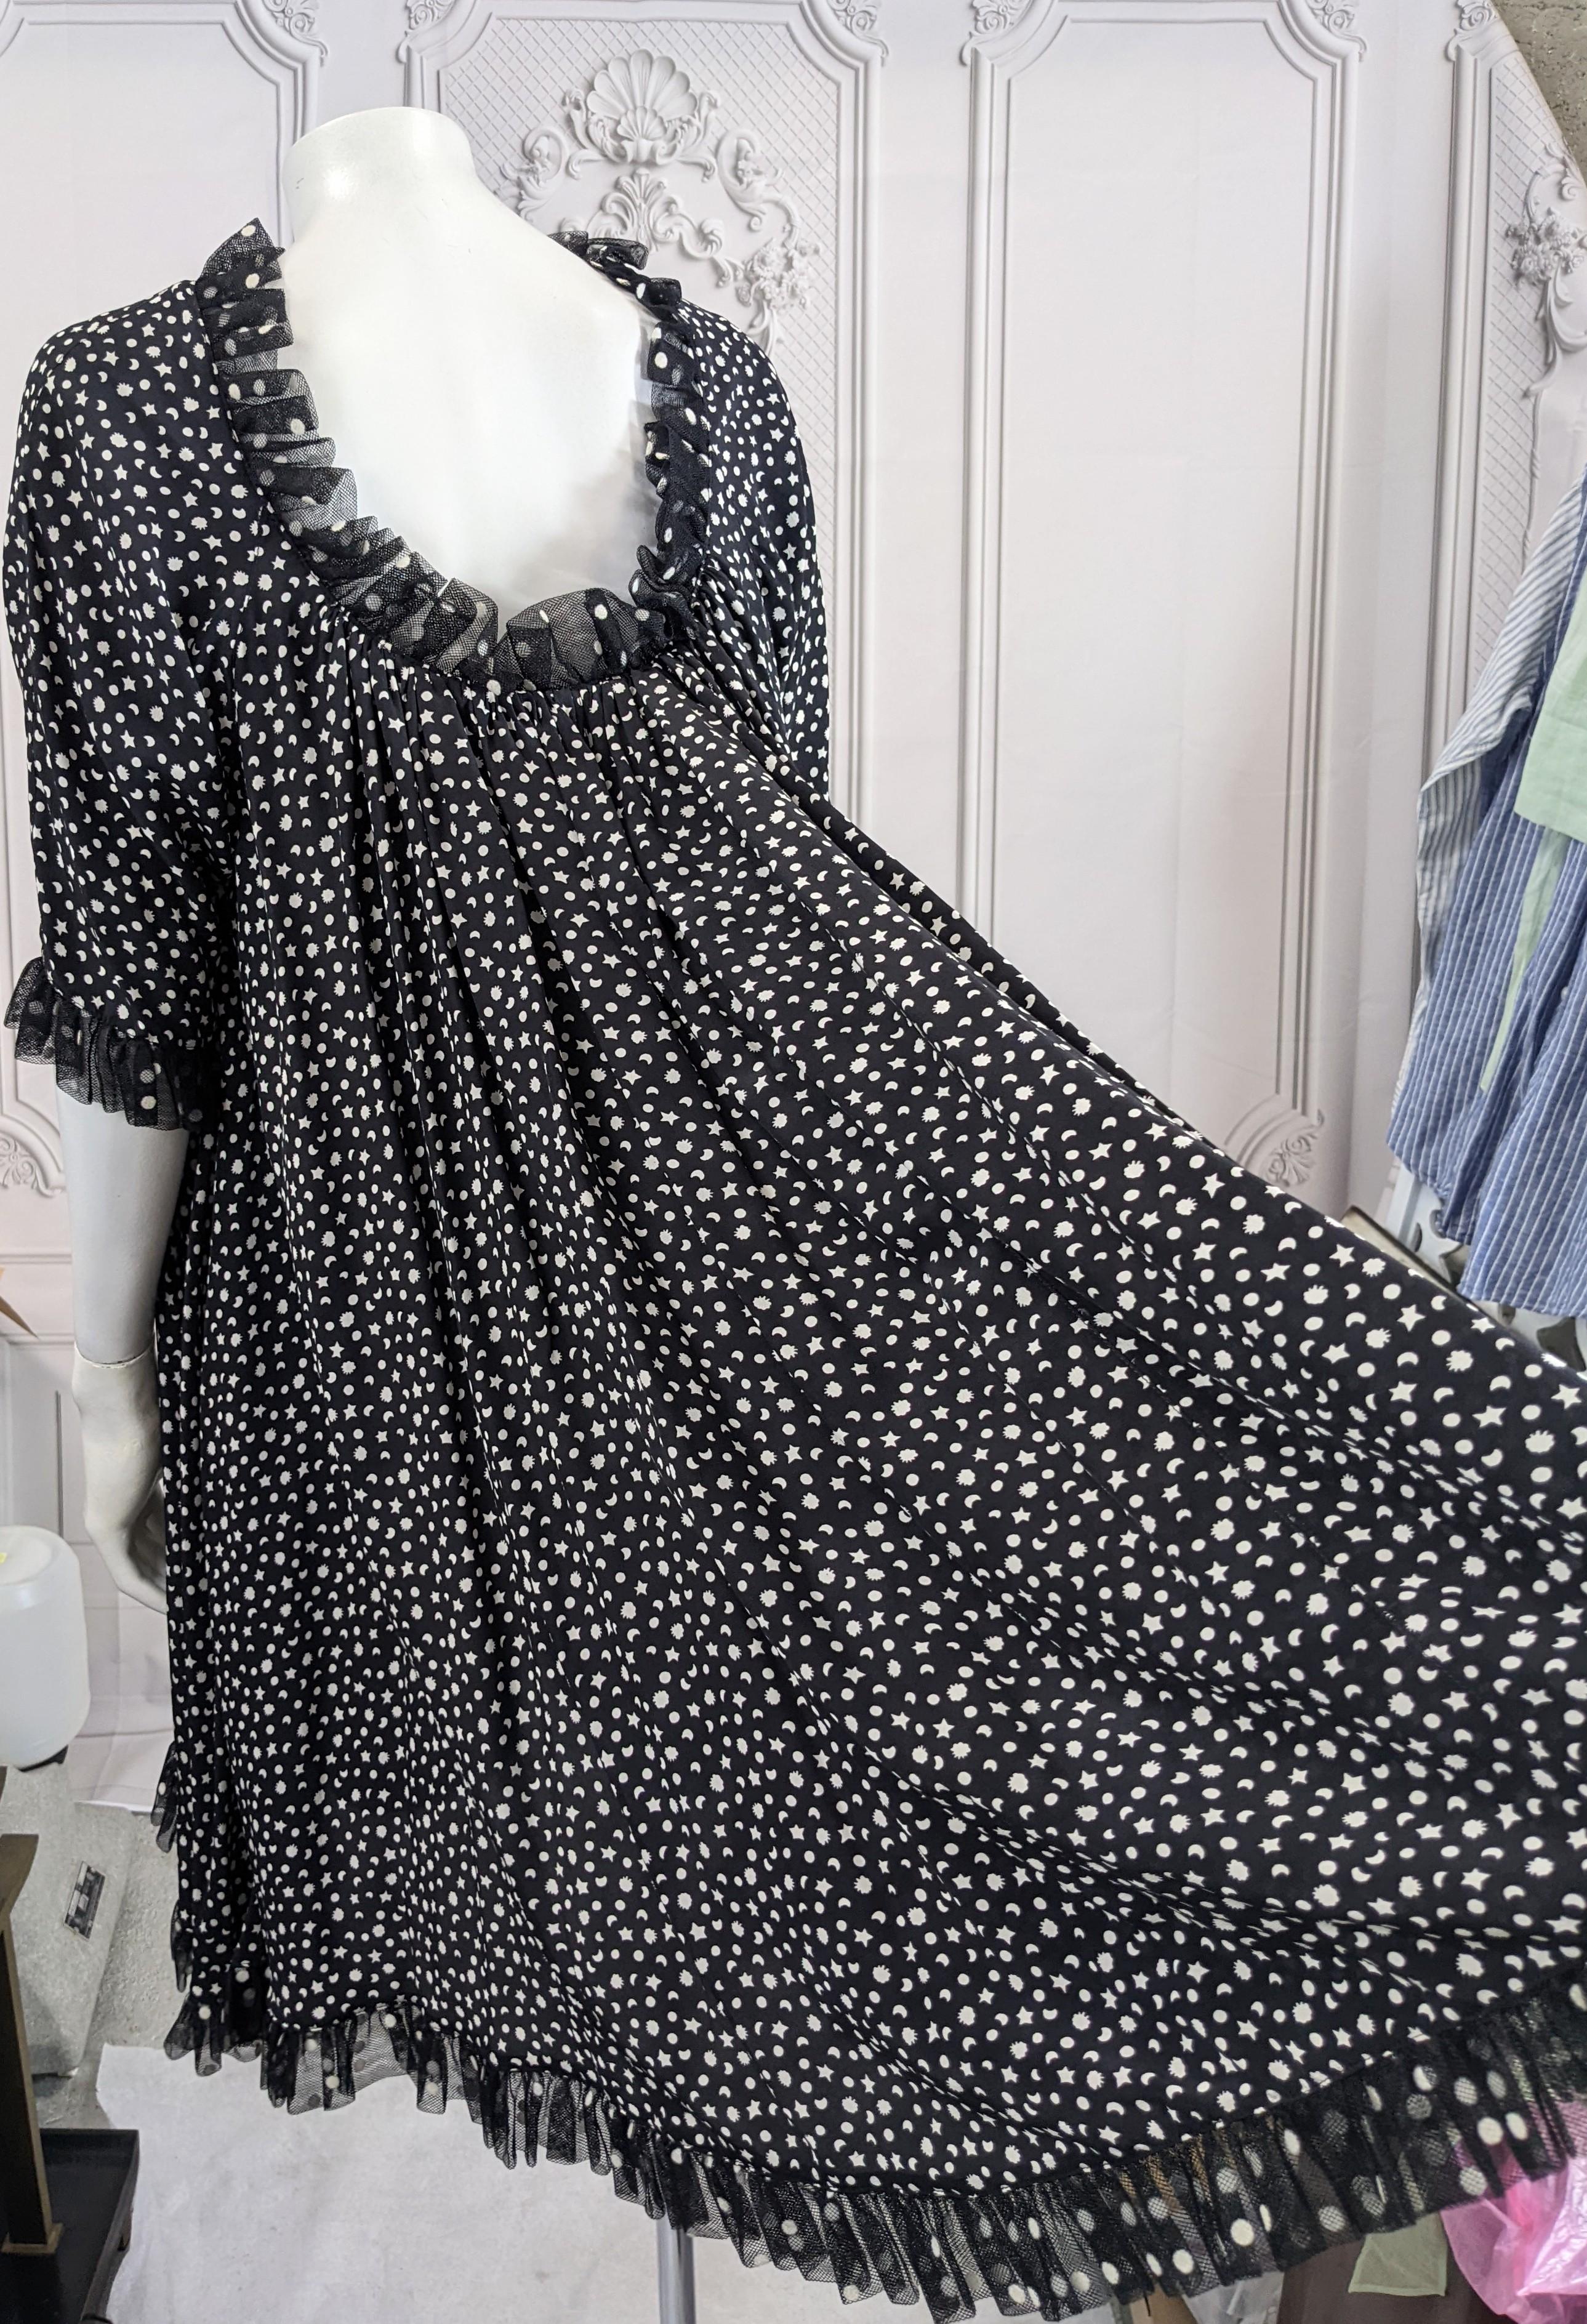 Geoffrey Beene Sillk Crepe Baby Doll Dress In Good Condition For Sale In New York, NY